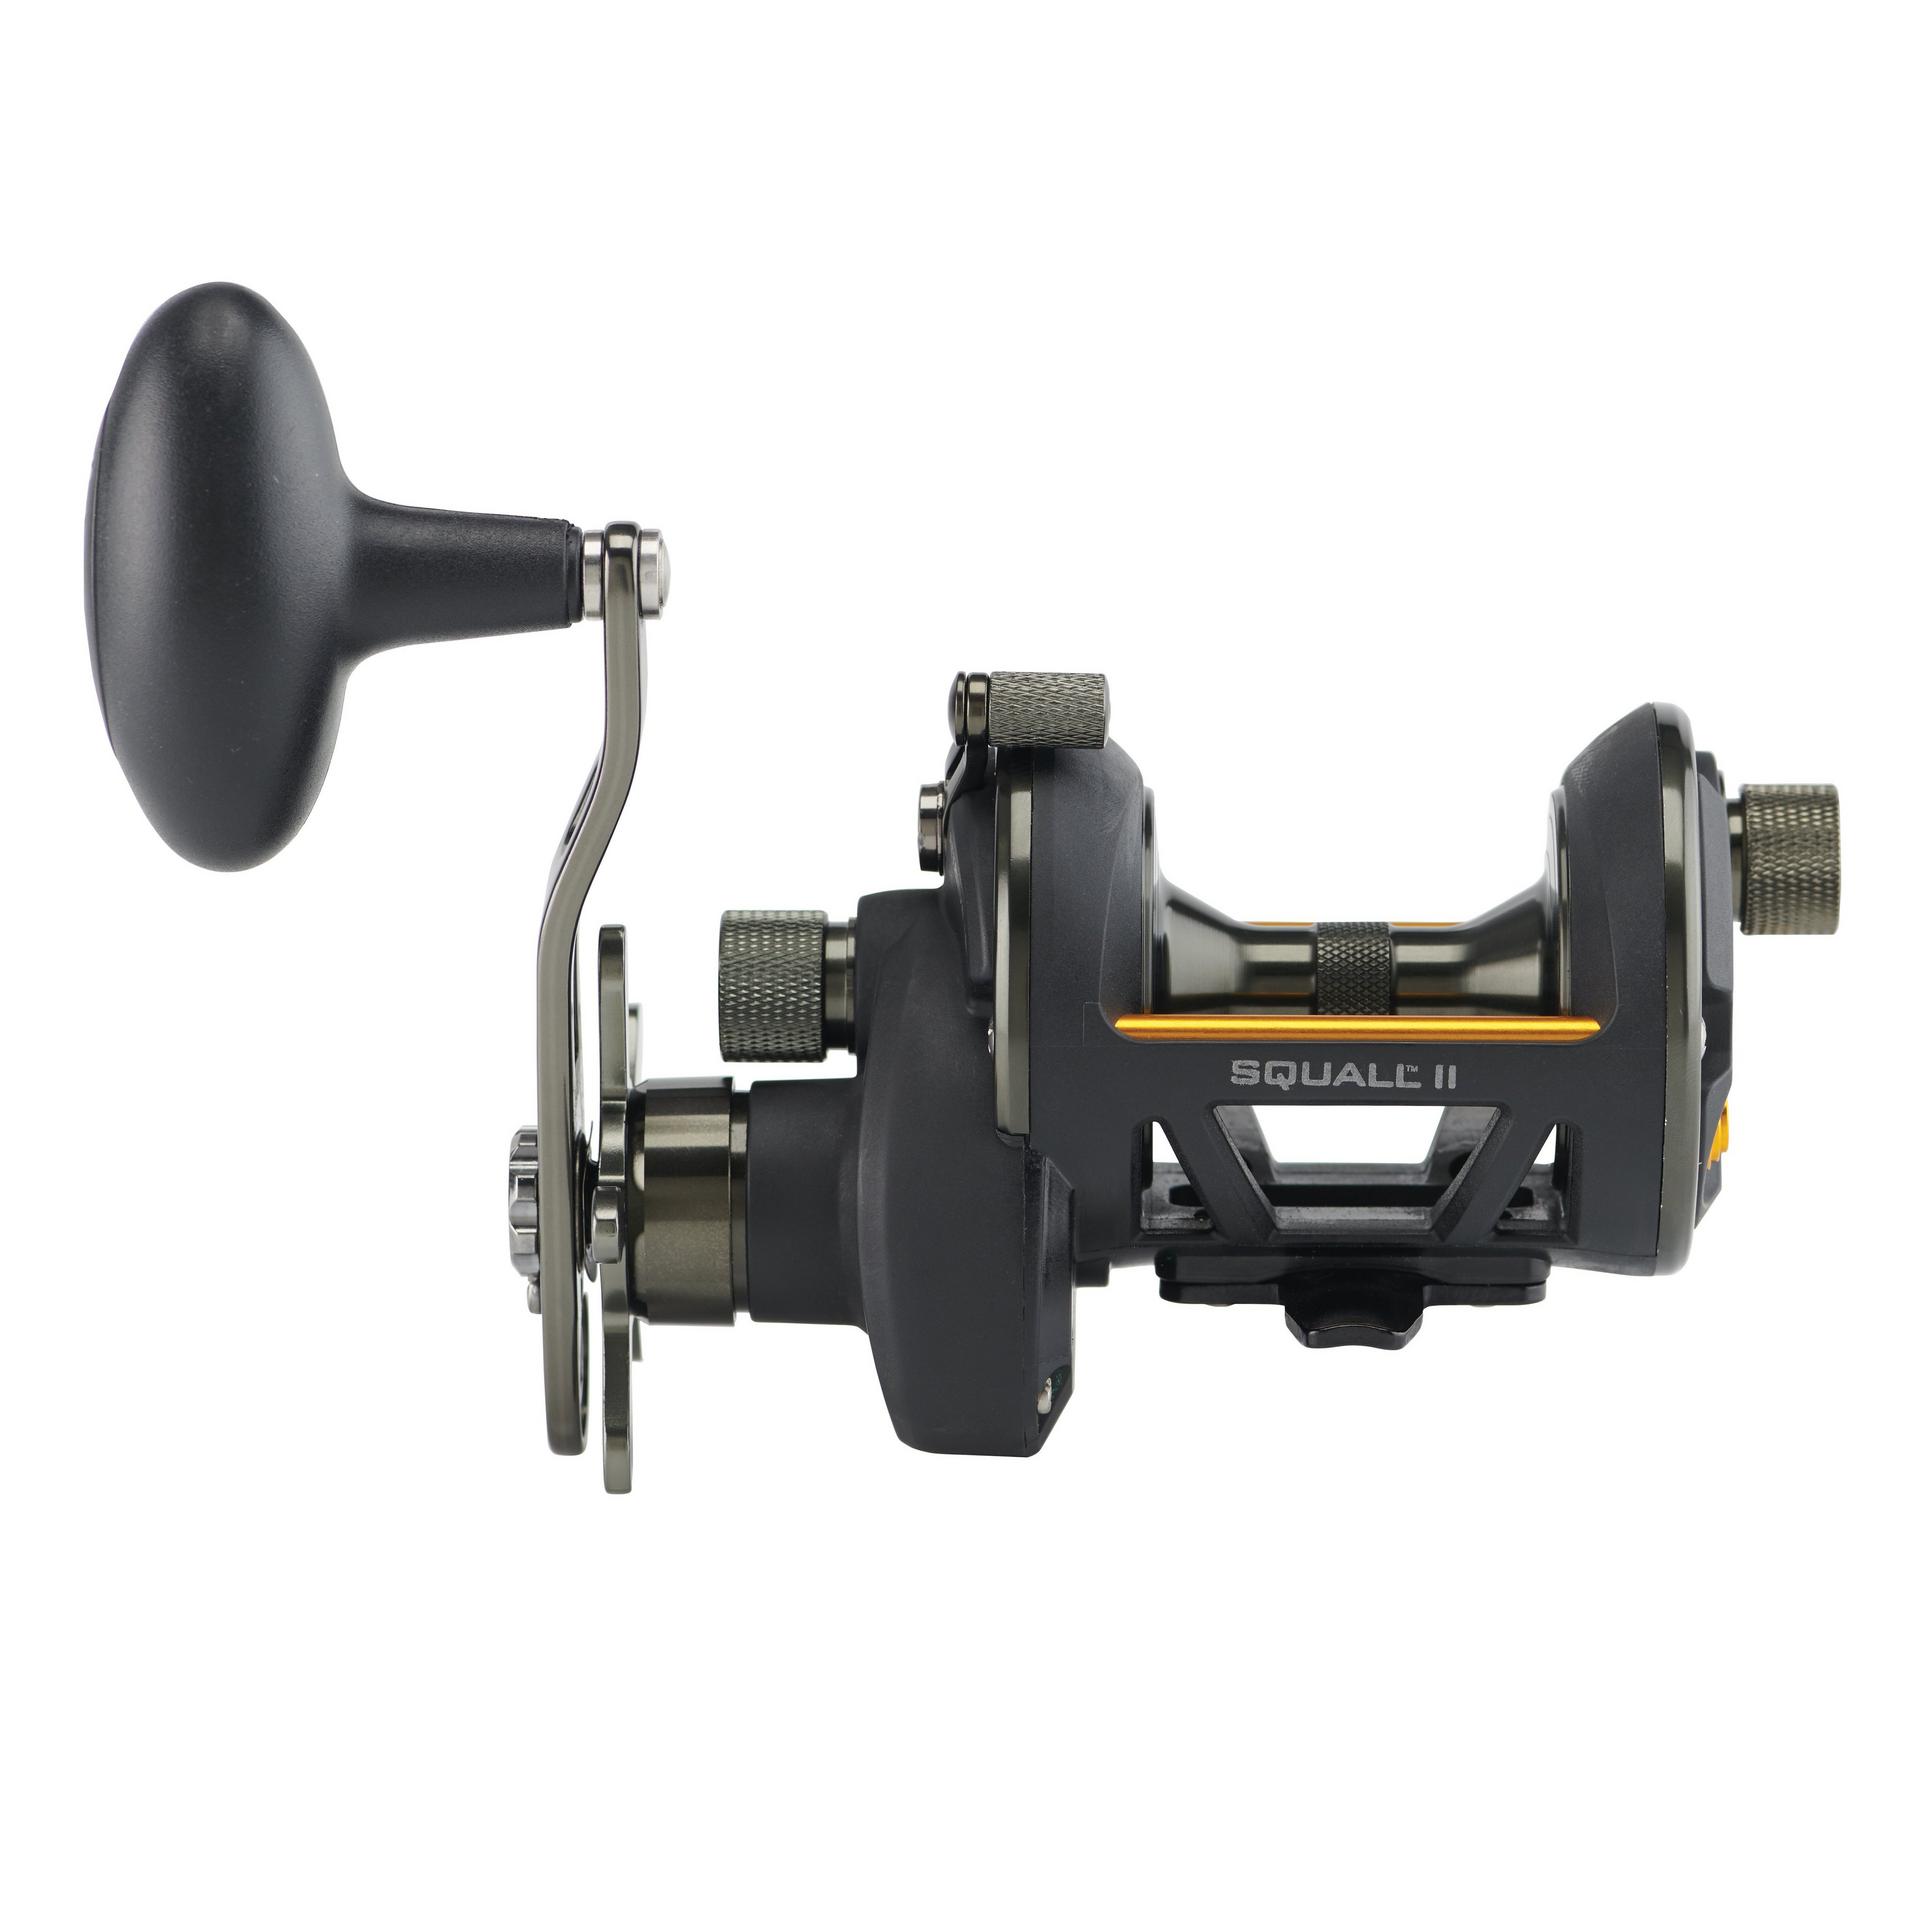 PENN Squall® II Star Drag Casting Special Conventional Reel